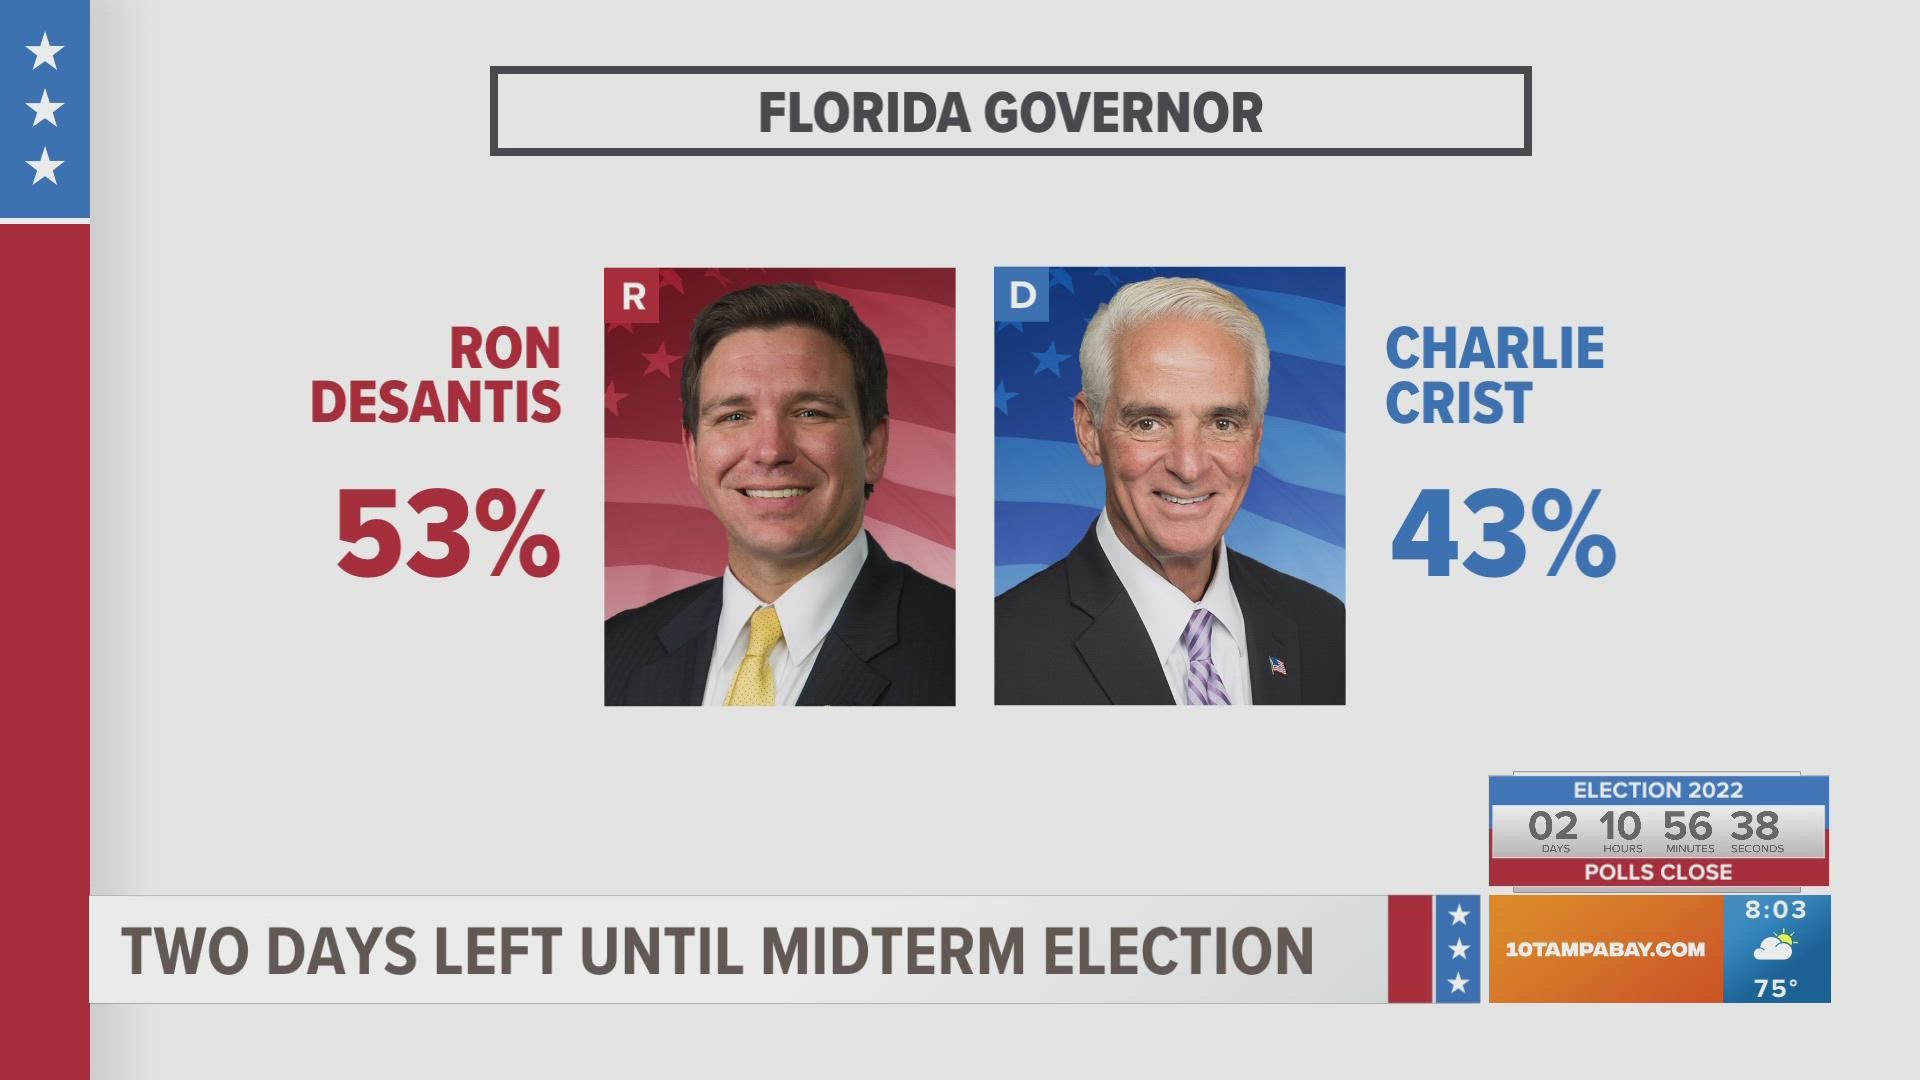 The latest poll numbers show that republican candidates have momentum.